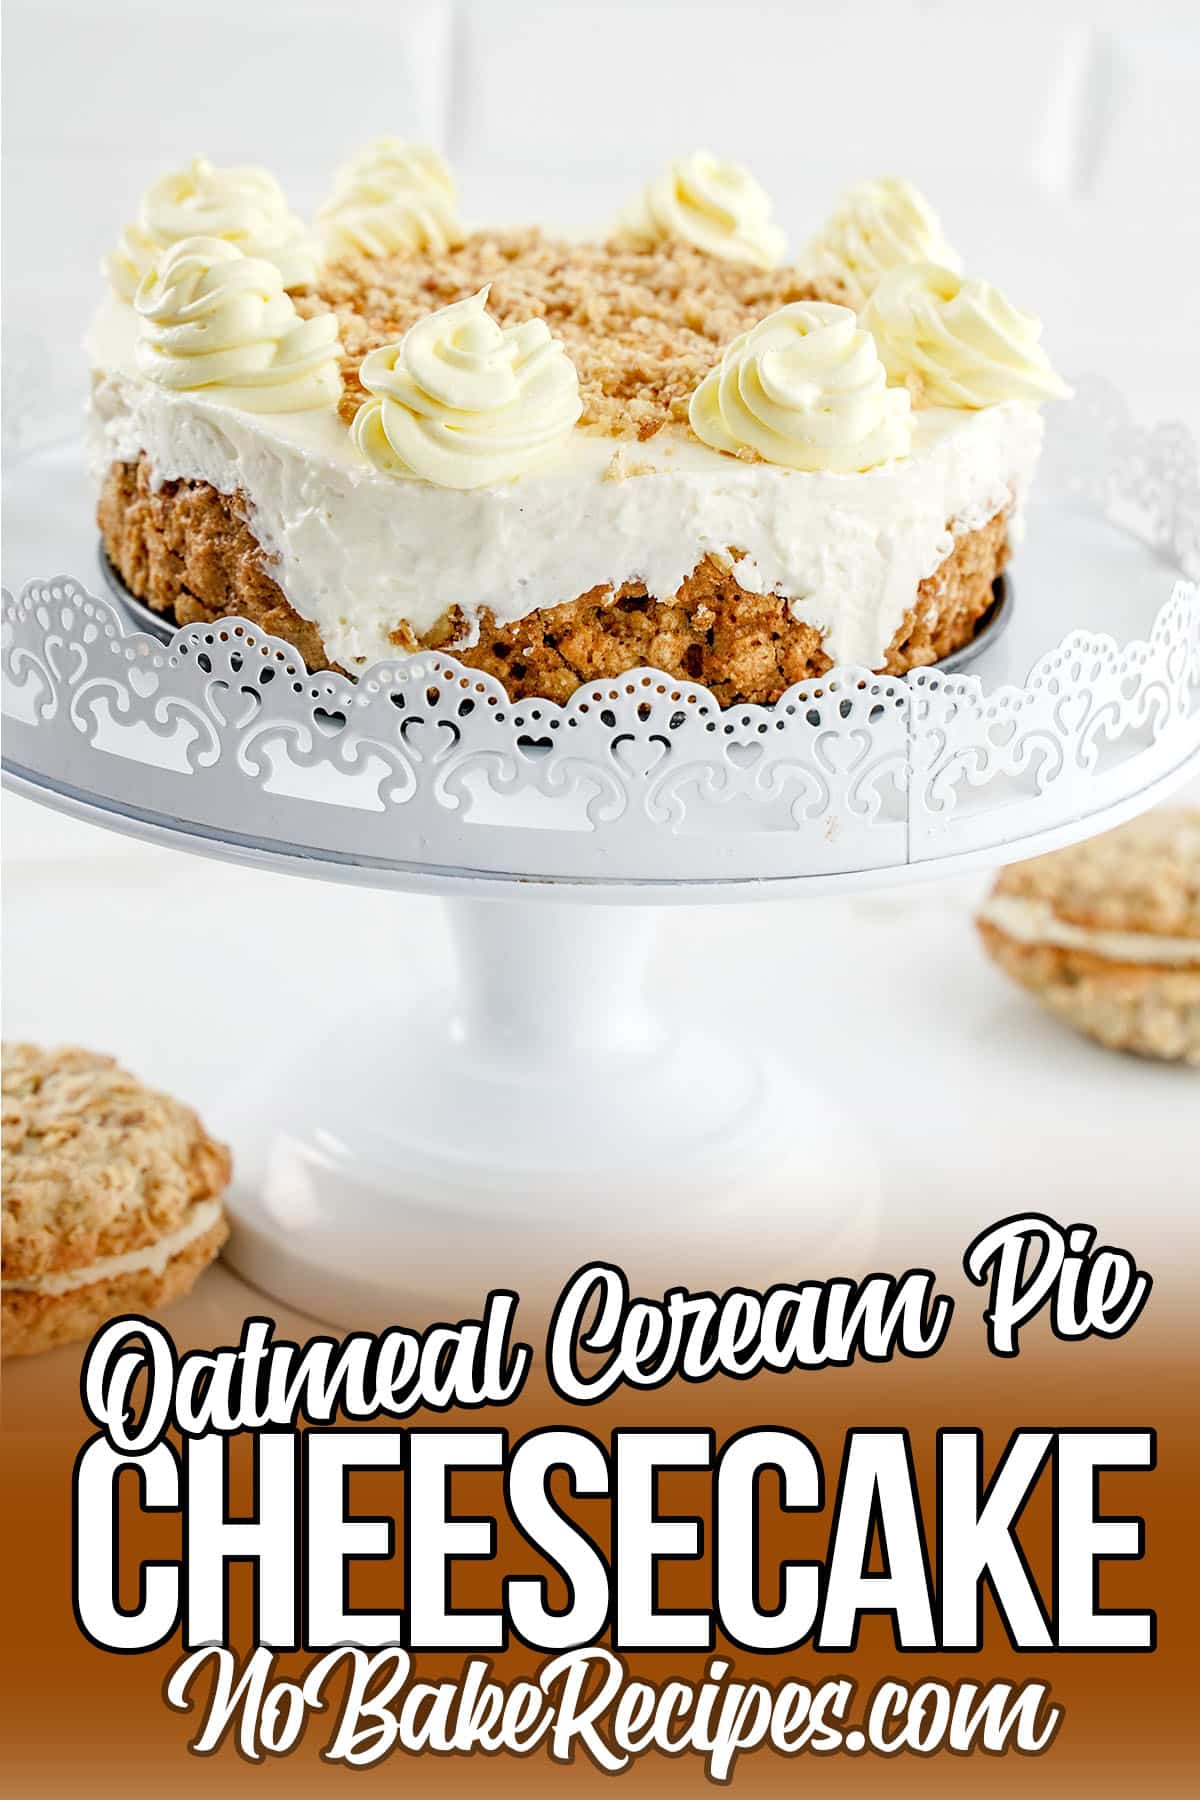 Party Display of Oatmeal Cream Pie.